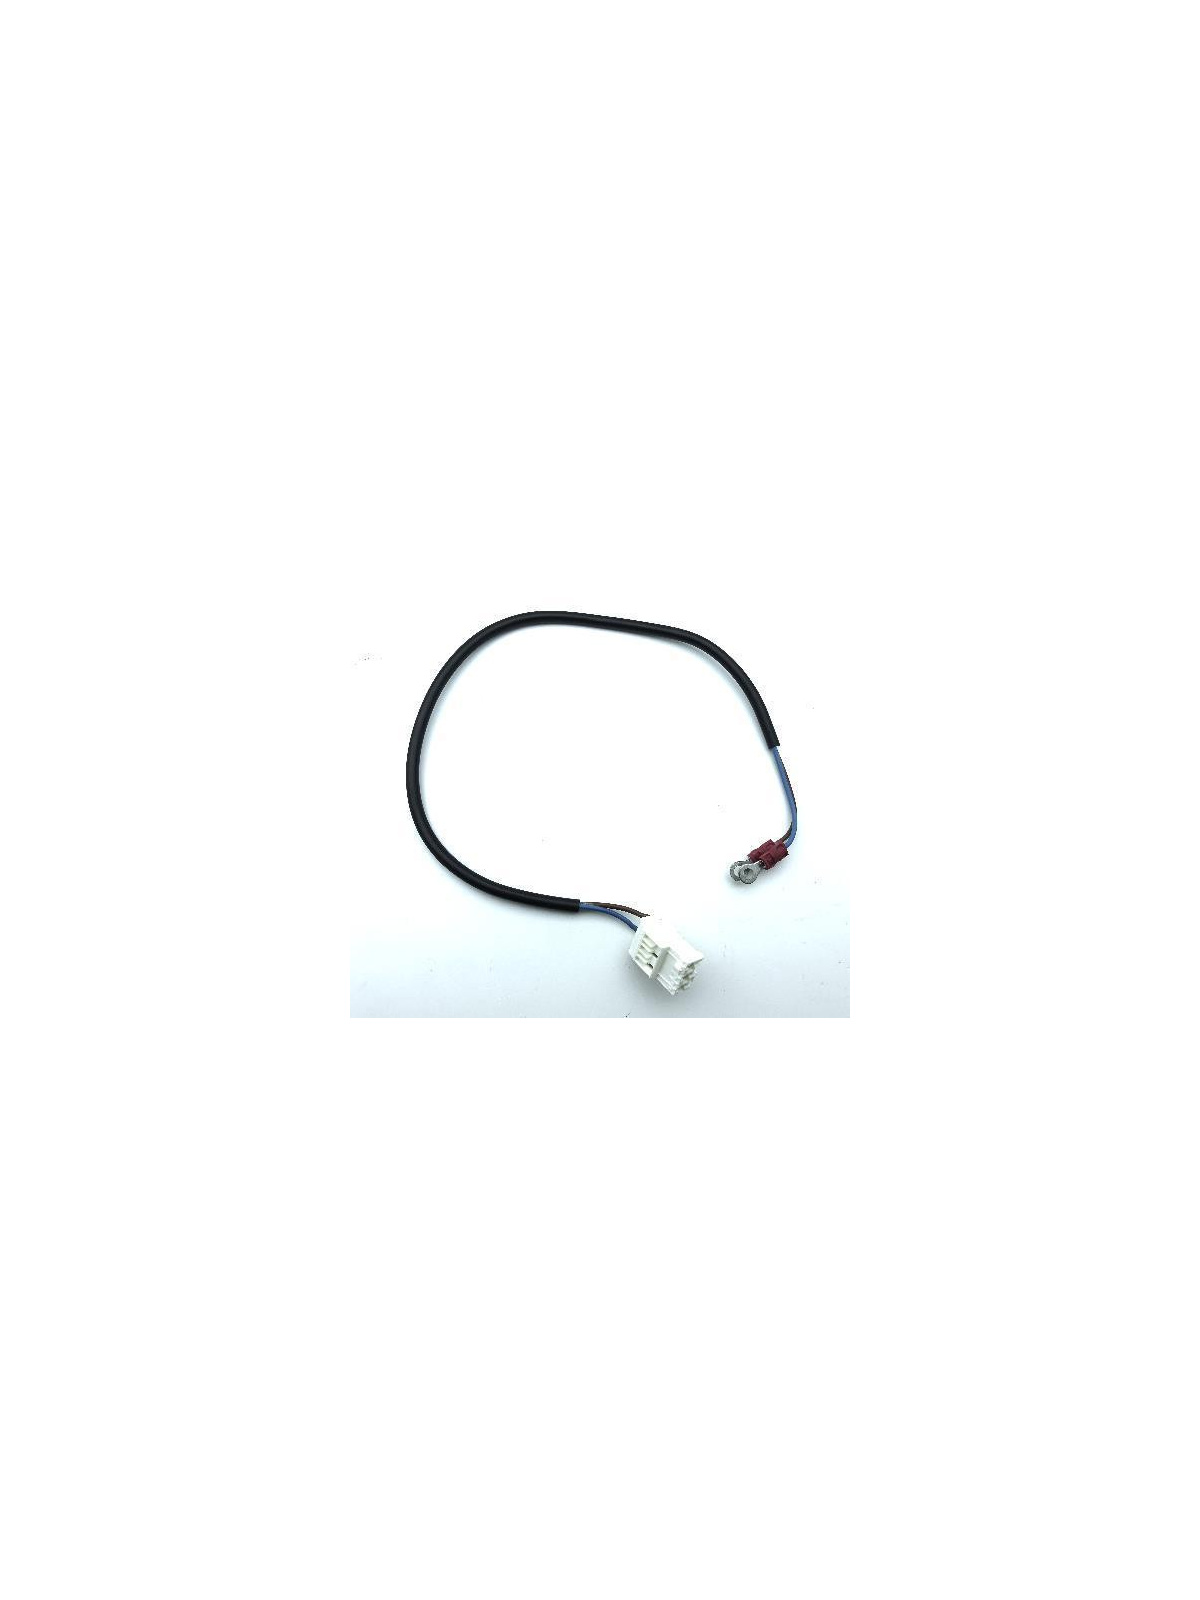 Virutex 8546200 Micro switch cable | JVL-Europe